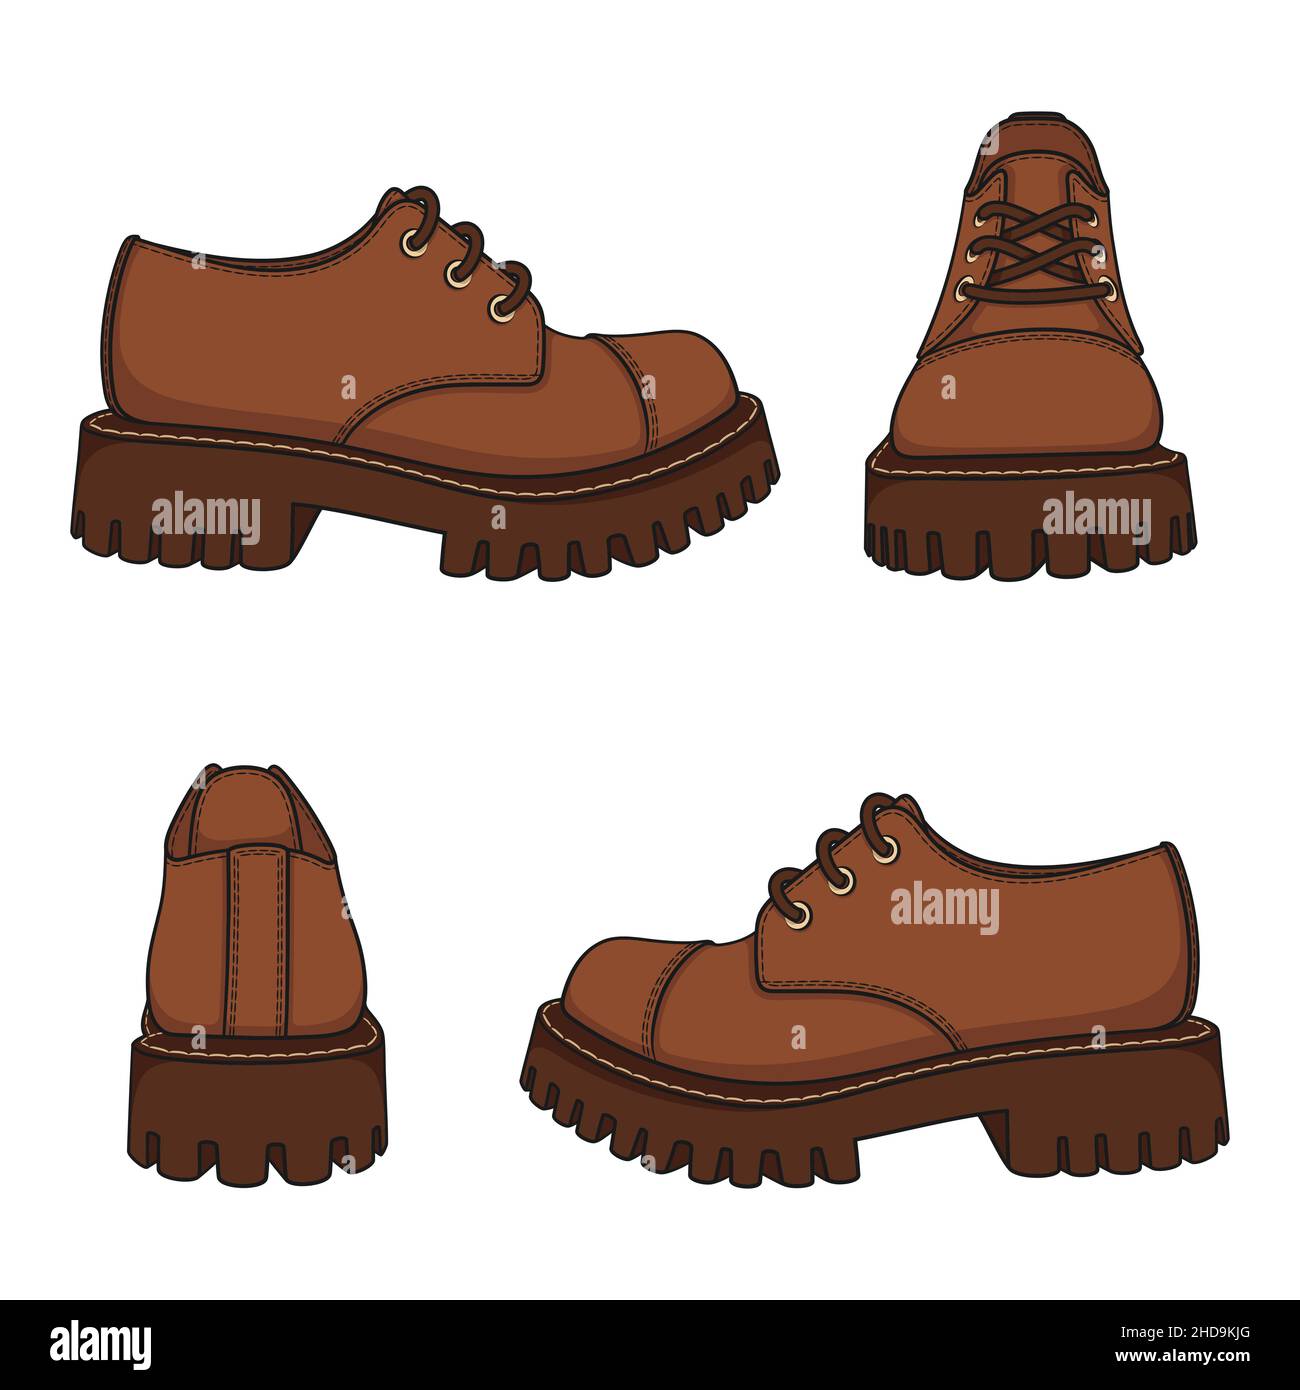 Set of color illustrations with brown shoes, boots. Isolated vector objects on white background. Stock Vector